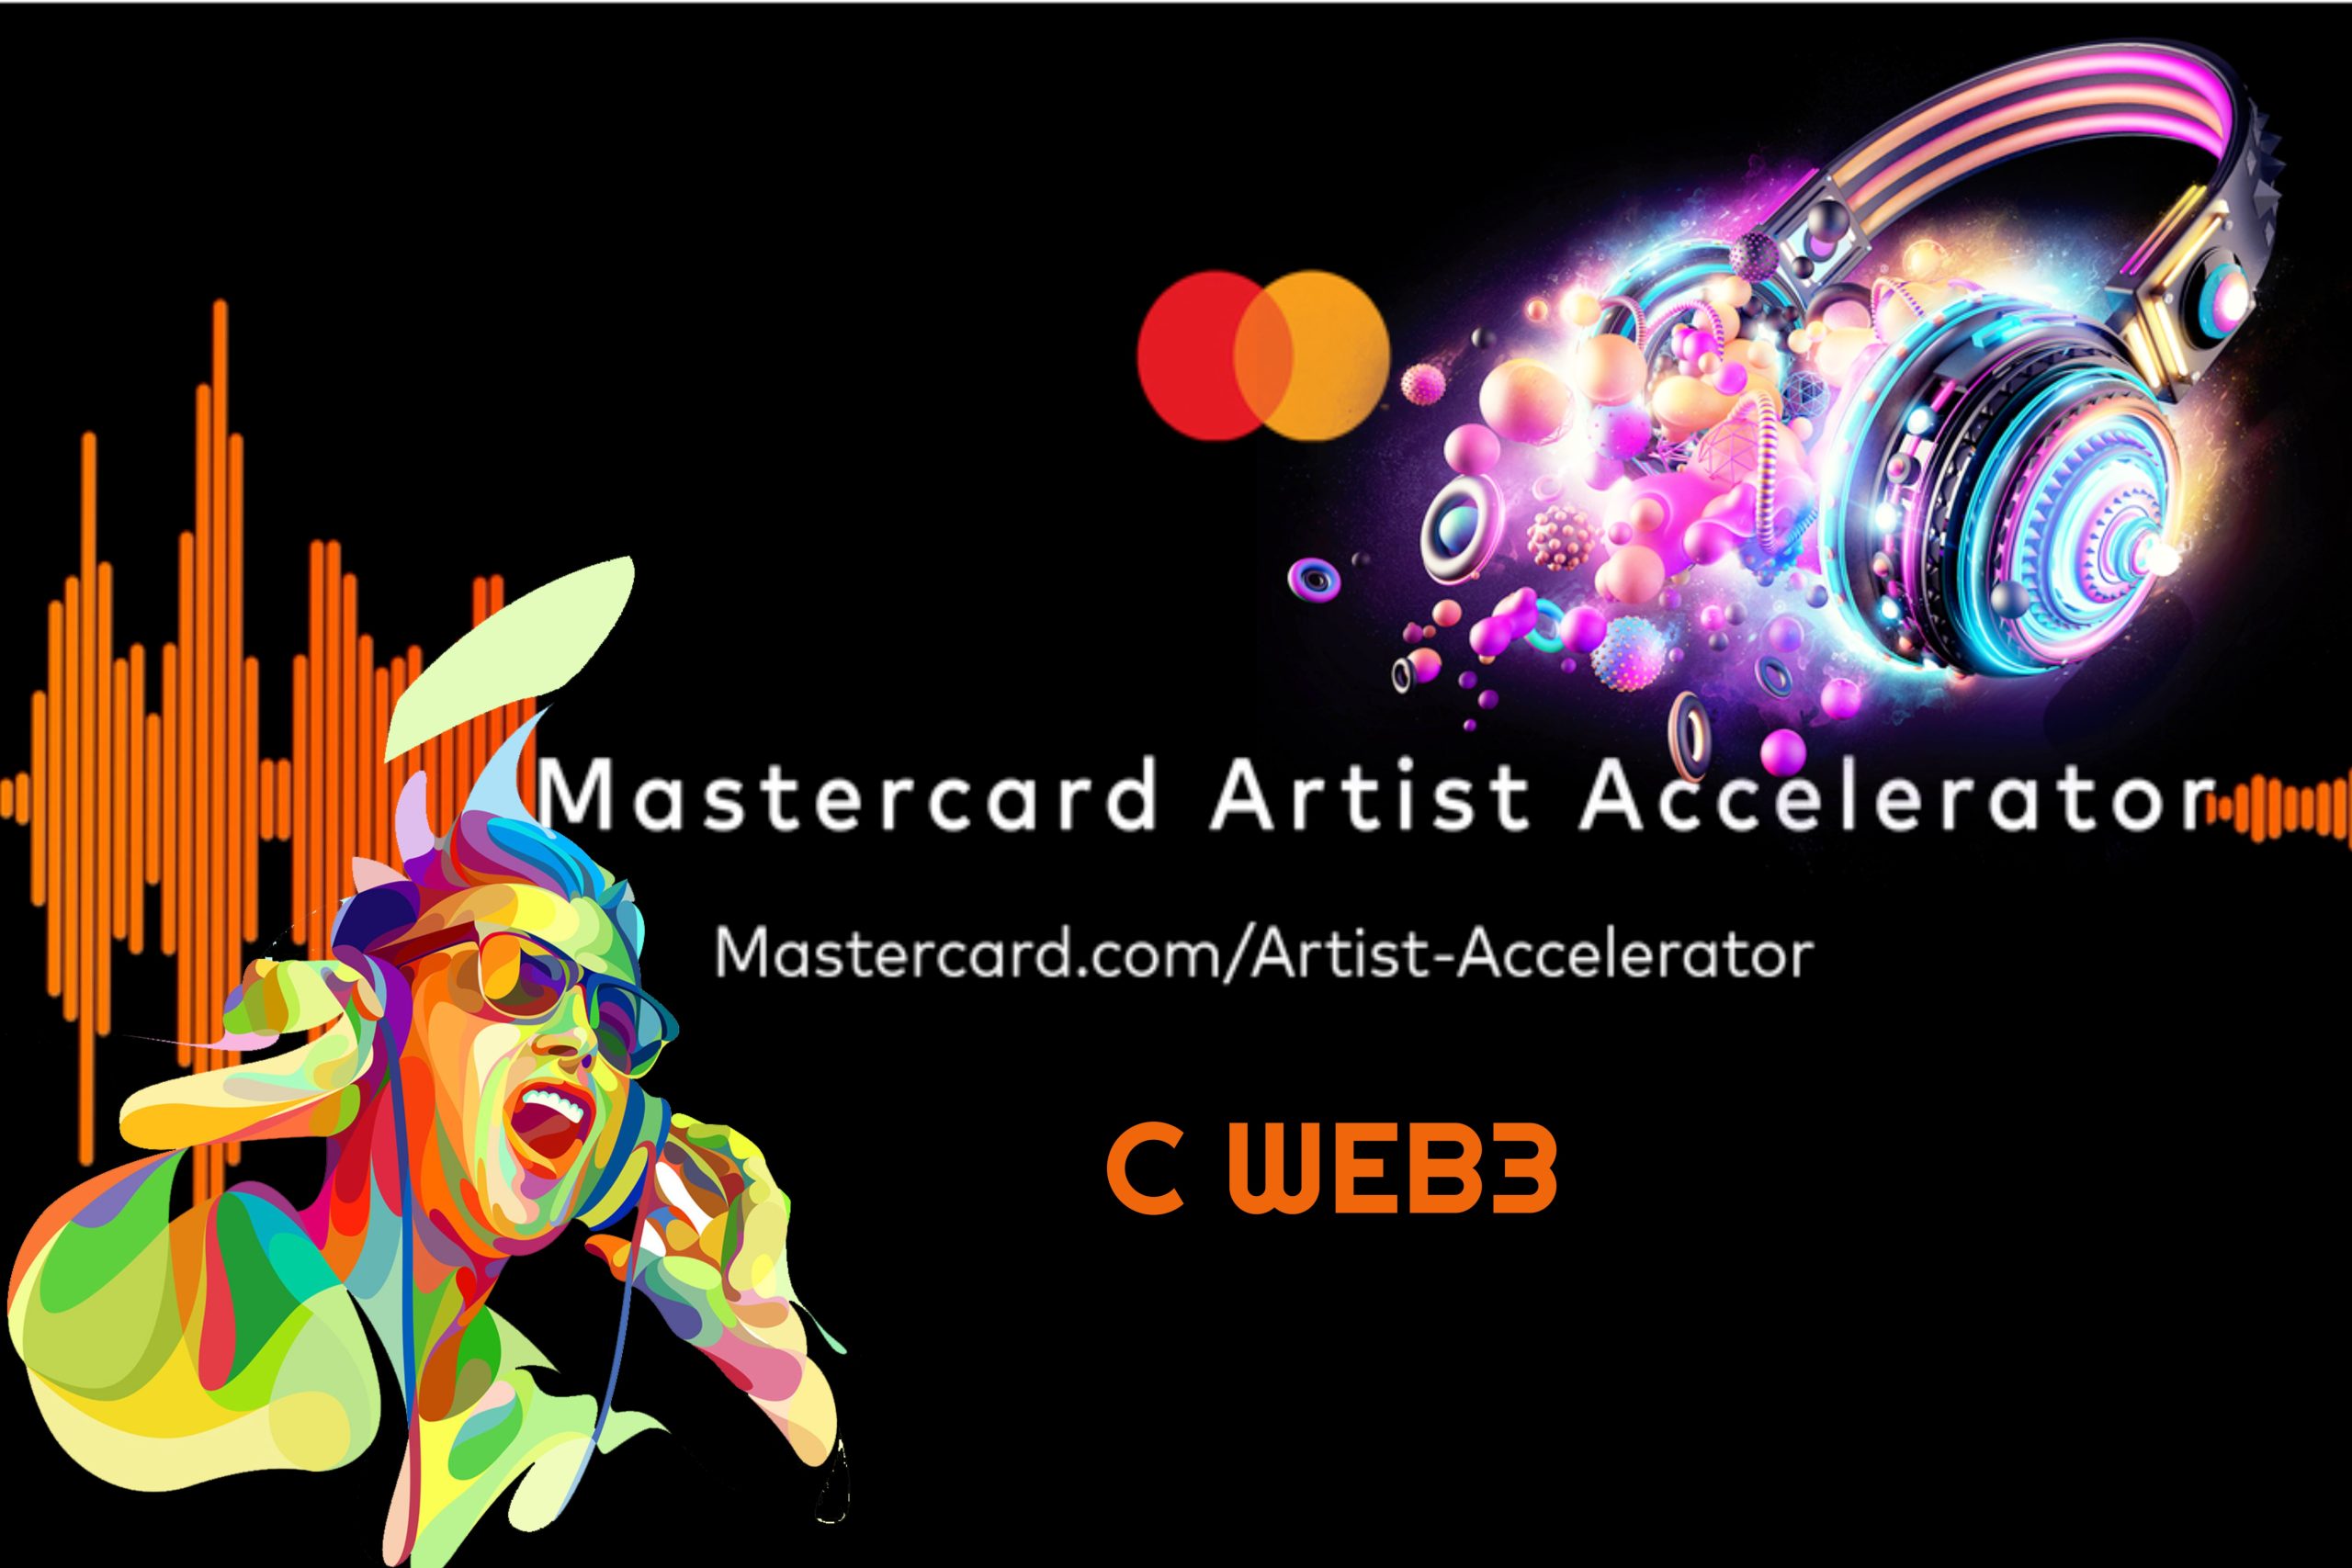 Mastercard and Polygon collaborate to launch the Web3 musician accelerator program